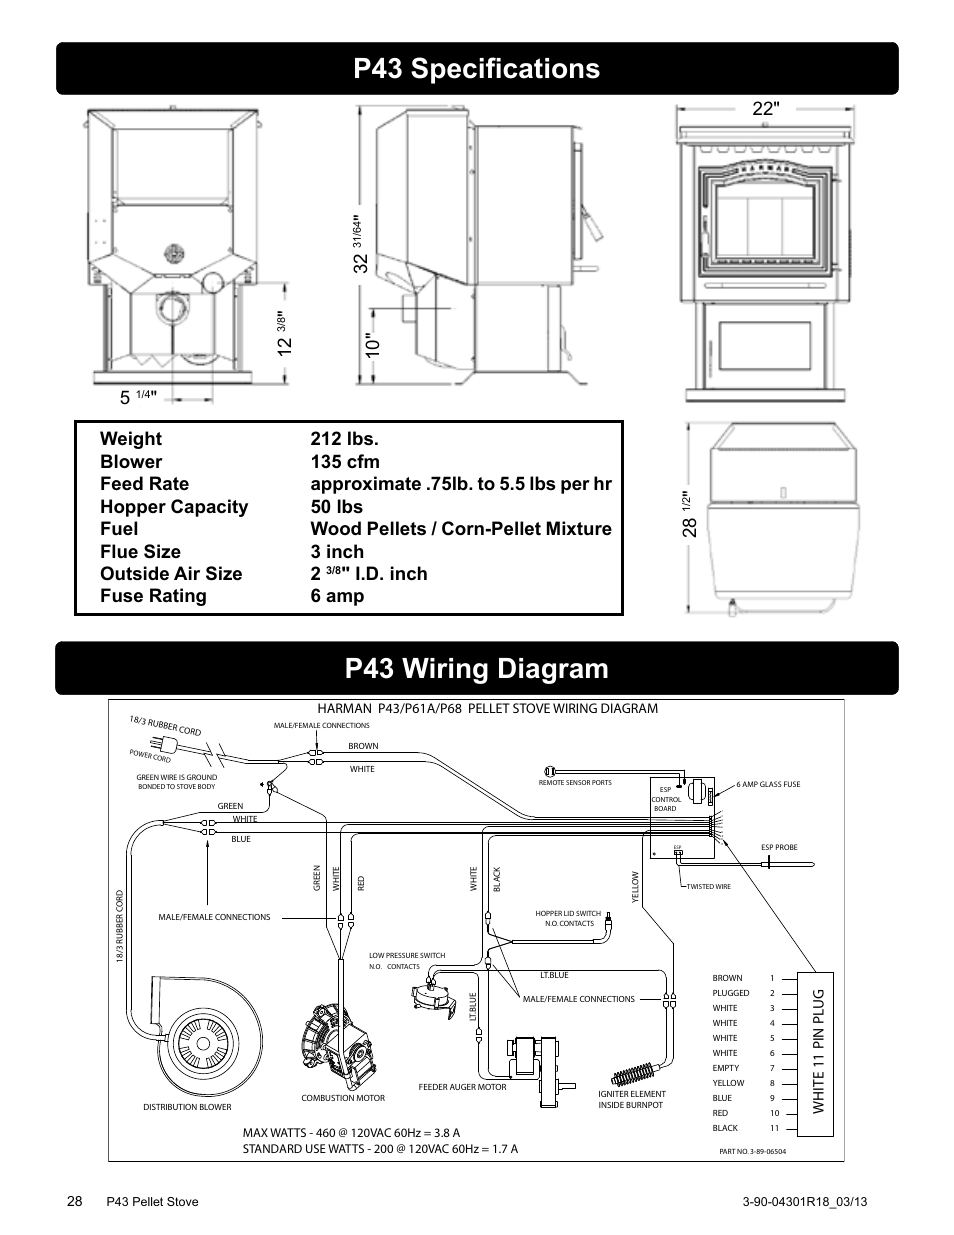 P43 Specifications  P43 Wiring Diagram  I D  Inch Fuse